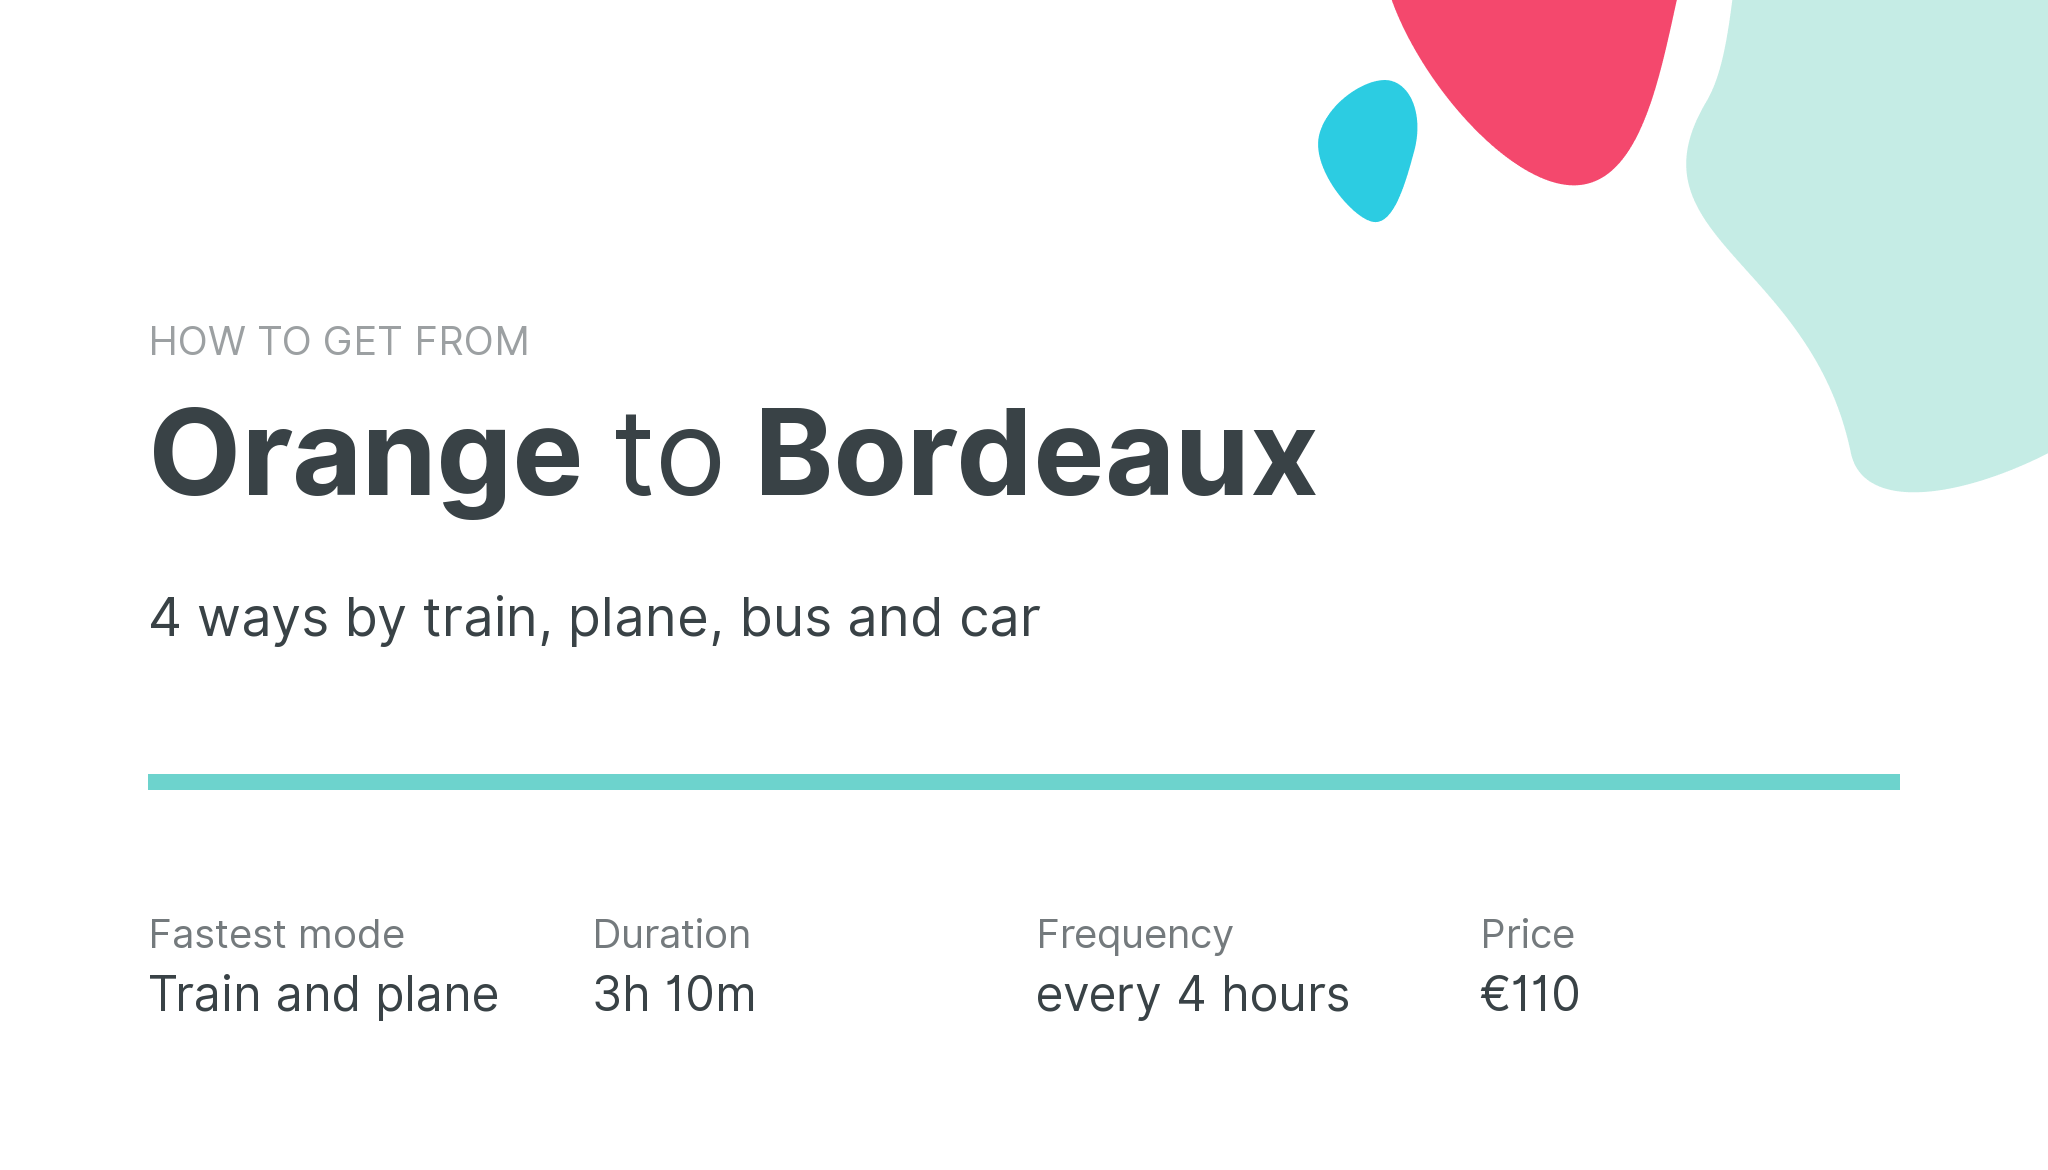 How do I get from Orange to Bordeaux